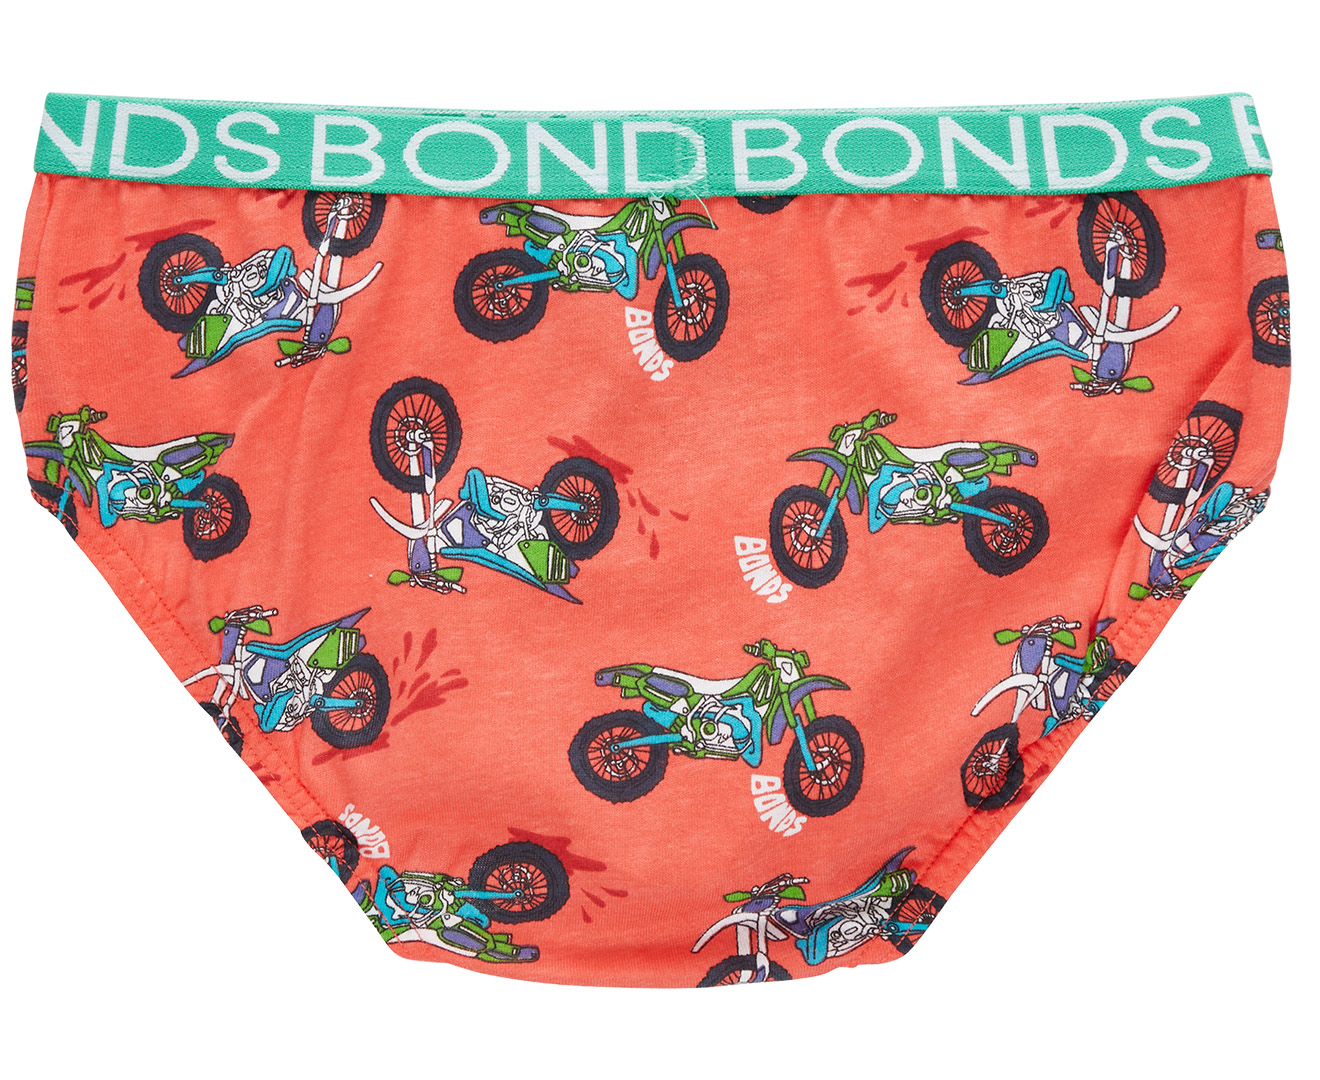 Bonds Youth Boys' Briefs 4-Pack - Green Multi